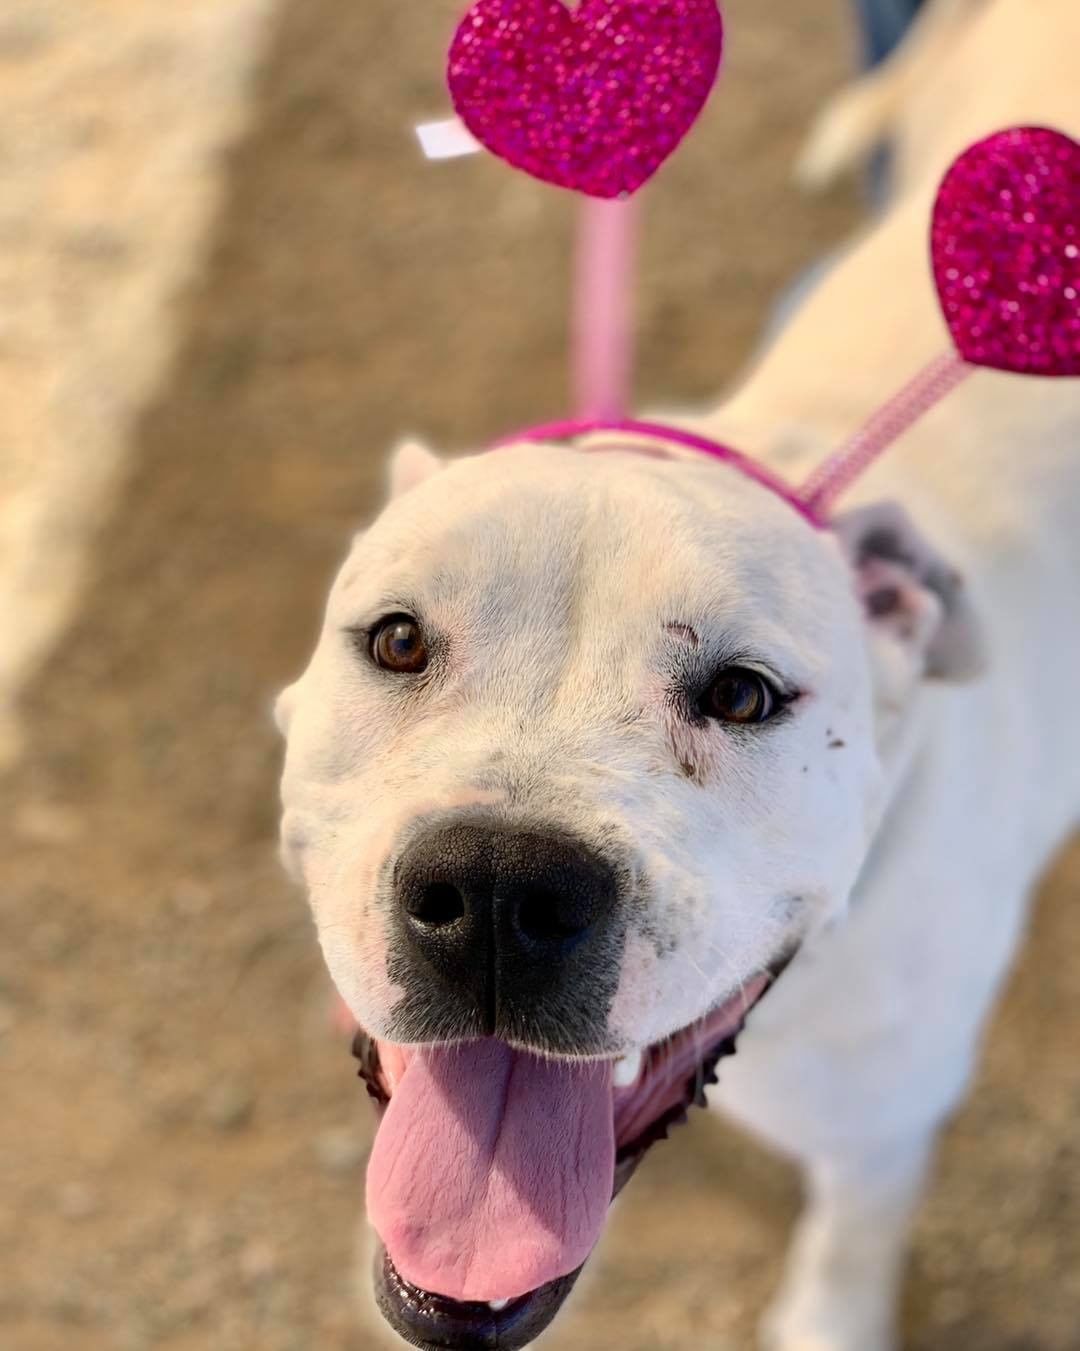 Have you met Angelica? This wonderful 1.5 year old is filled with love and has been patiently waiting to find her home.

Angelica loves going on daily walks, playing with her stuffies, snuggling and hanging out with her doggie friends 🐶 Although this cutie can be quite shy and hesitant at first, with a little patience and kindness she comes around very quickly. Angelica would do best in a calmer home with an understanding family and with another dog. 

Been in search for a loyal companion who will make you laugh and feel extremely loved everyday? Look no further as Angelica is your girl! To apply to adopt, head to lpchumanesociety.org and we will schedule a time for you to meet this wonderful lady! 

<a target='_blank' href='https://www.instagram.com/explore/tags/lpchs/'>#lpchs</a> <a target='_blank' href='https://www.instagram.com/explore/tags/adopt/'>#adopt</a> <a target='_blank' href='https://www.instagram.com/explore/tags/pittie/'>#pittie</a> <a target='_blank' href='https://www.instagram.com/explore/tags/homefortheholidays/'>#homefortheholidays</a>